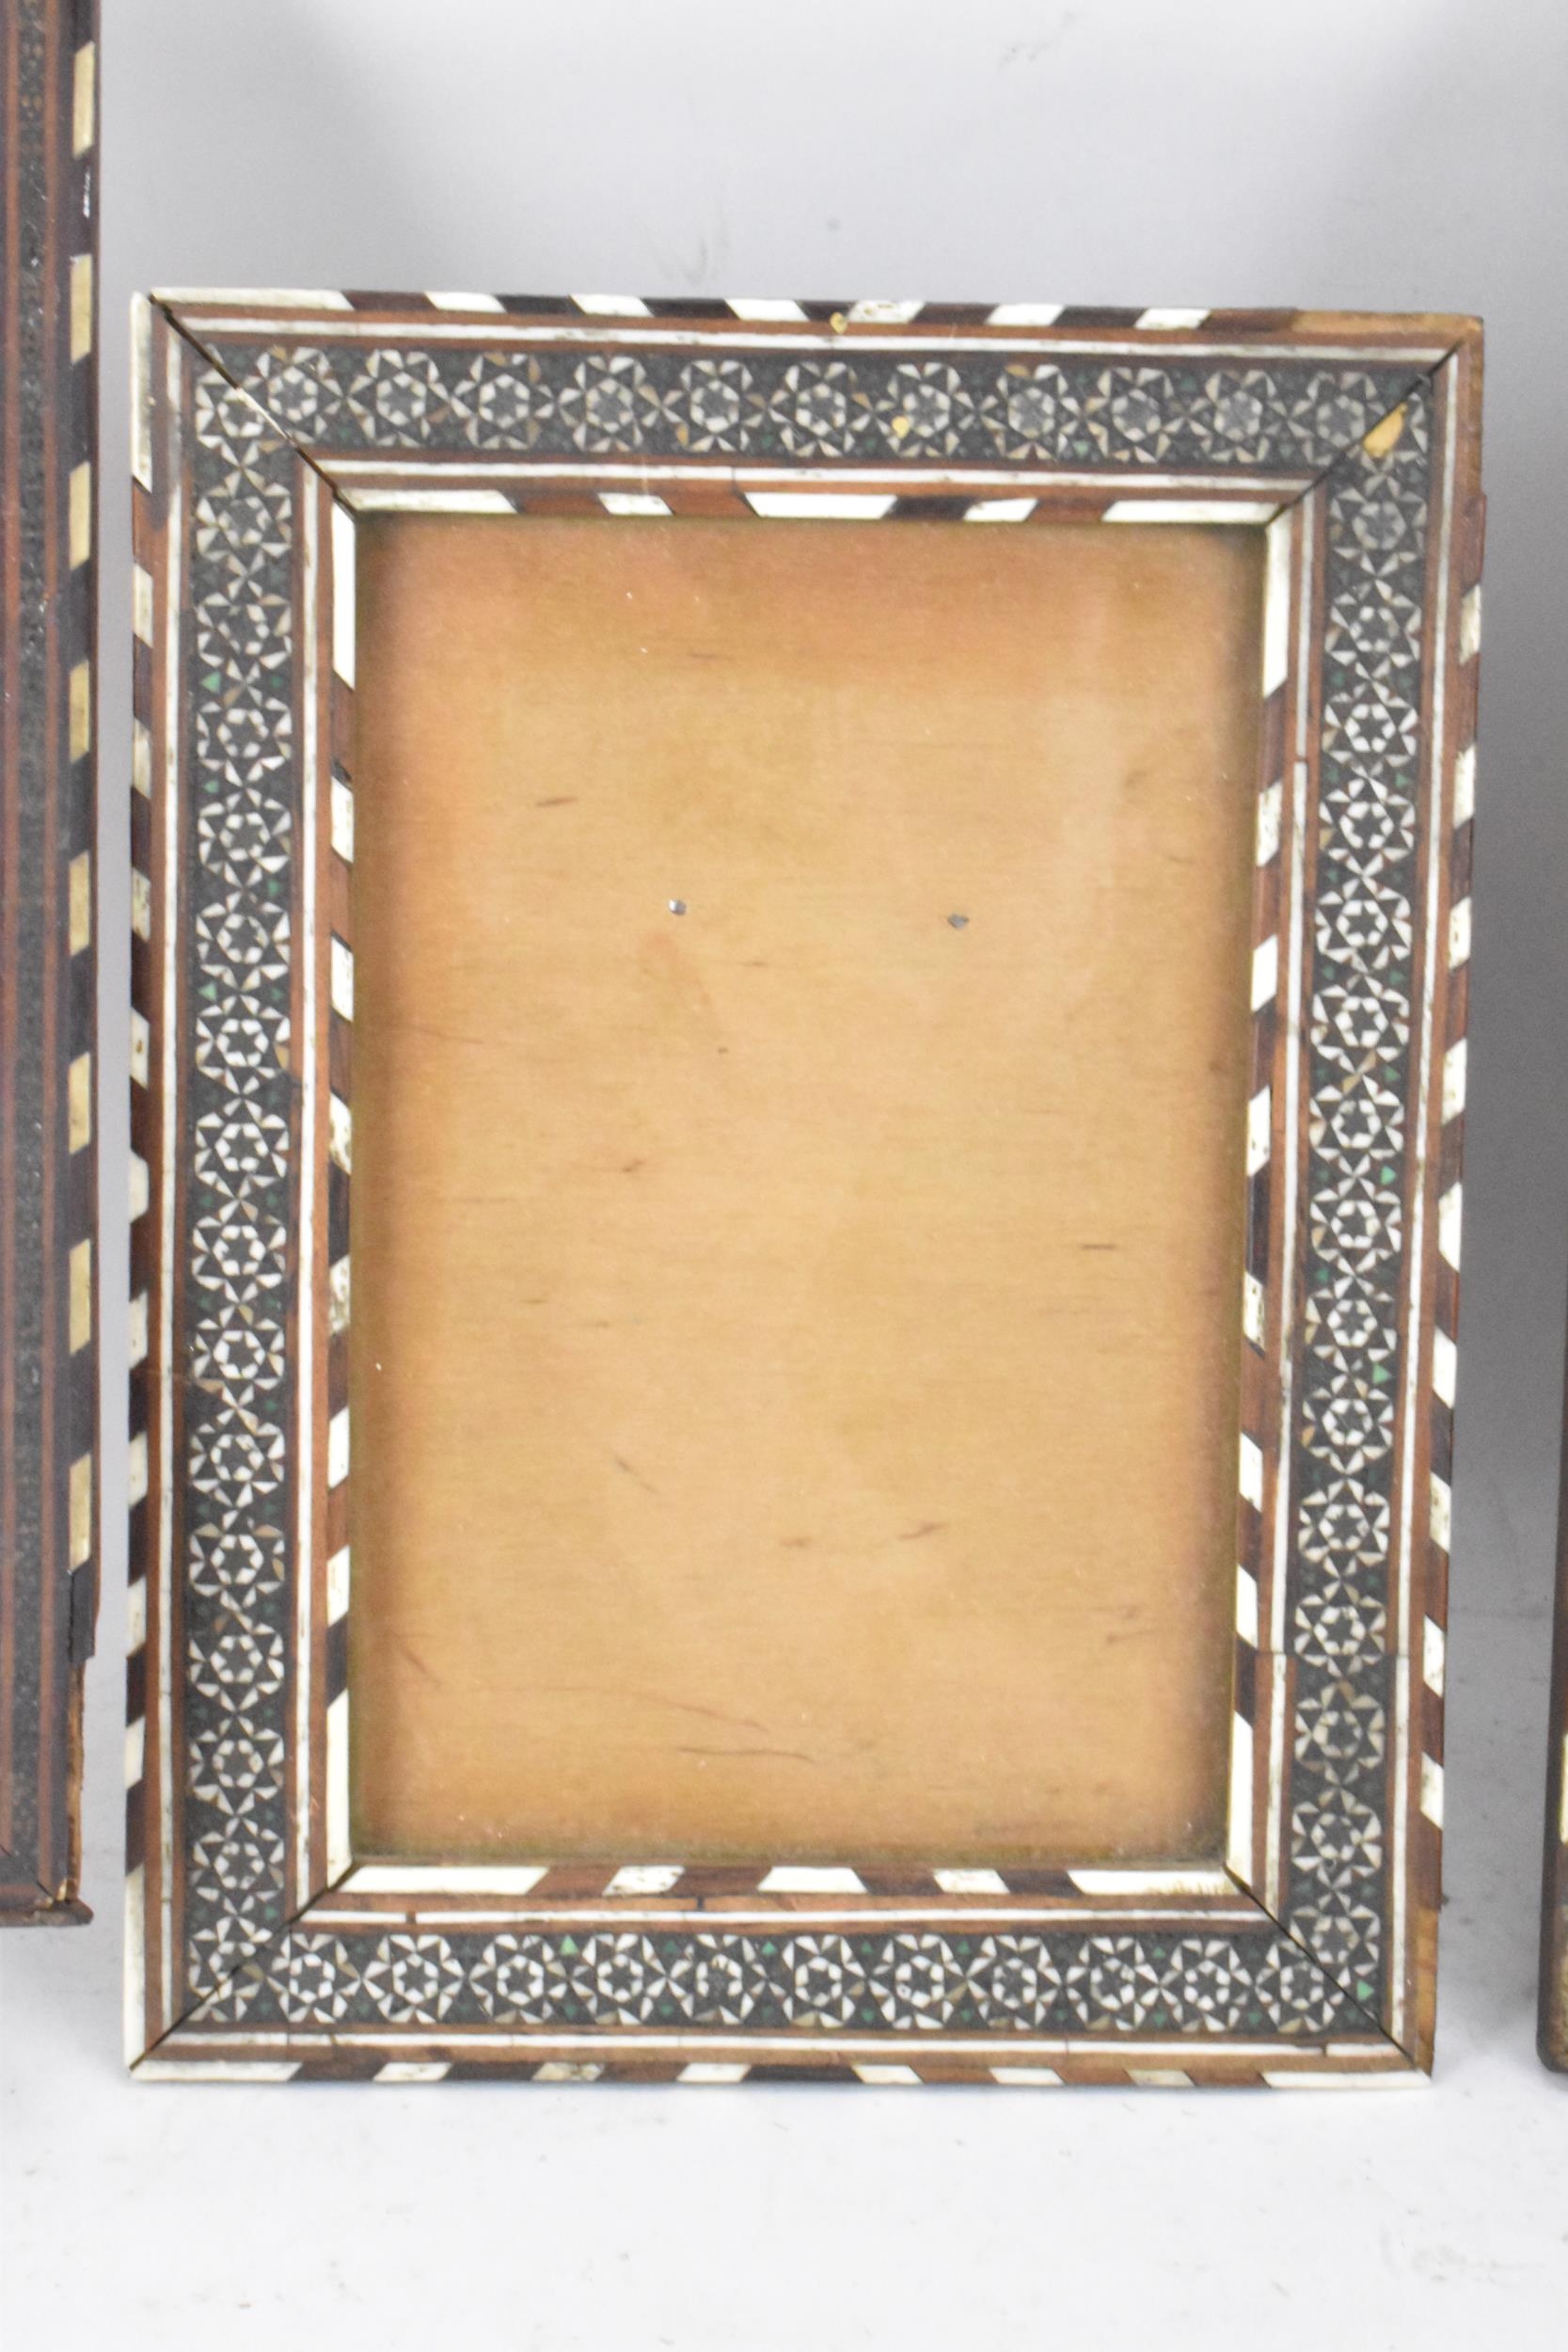 Three similar Persian late Qajar dynasty photograph frames, the profusely inlaid frames having - Image 6 of 14